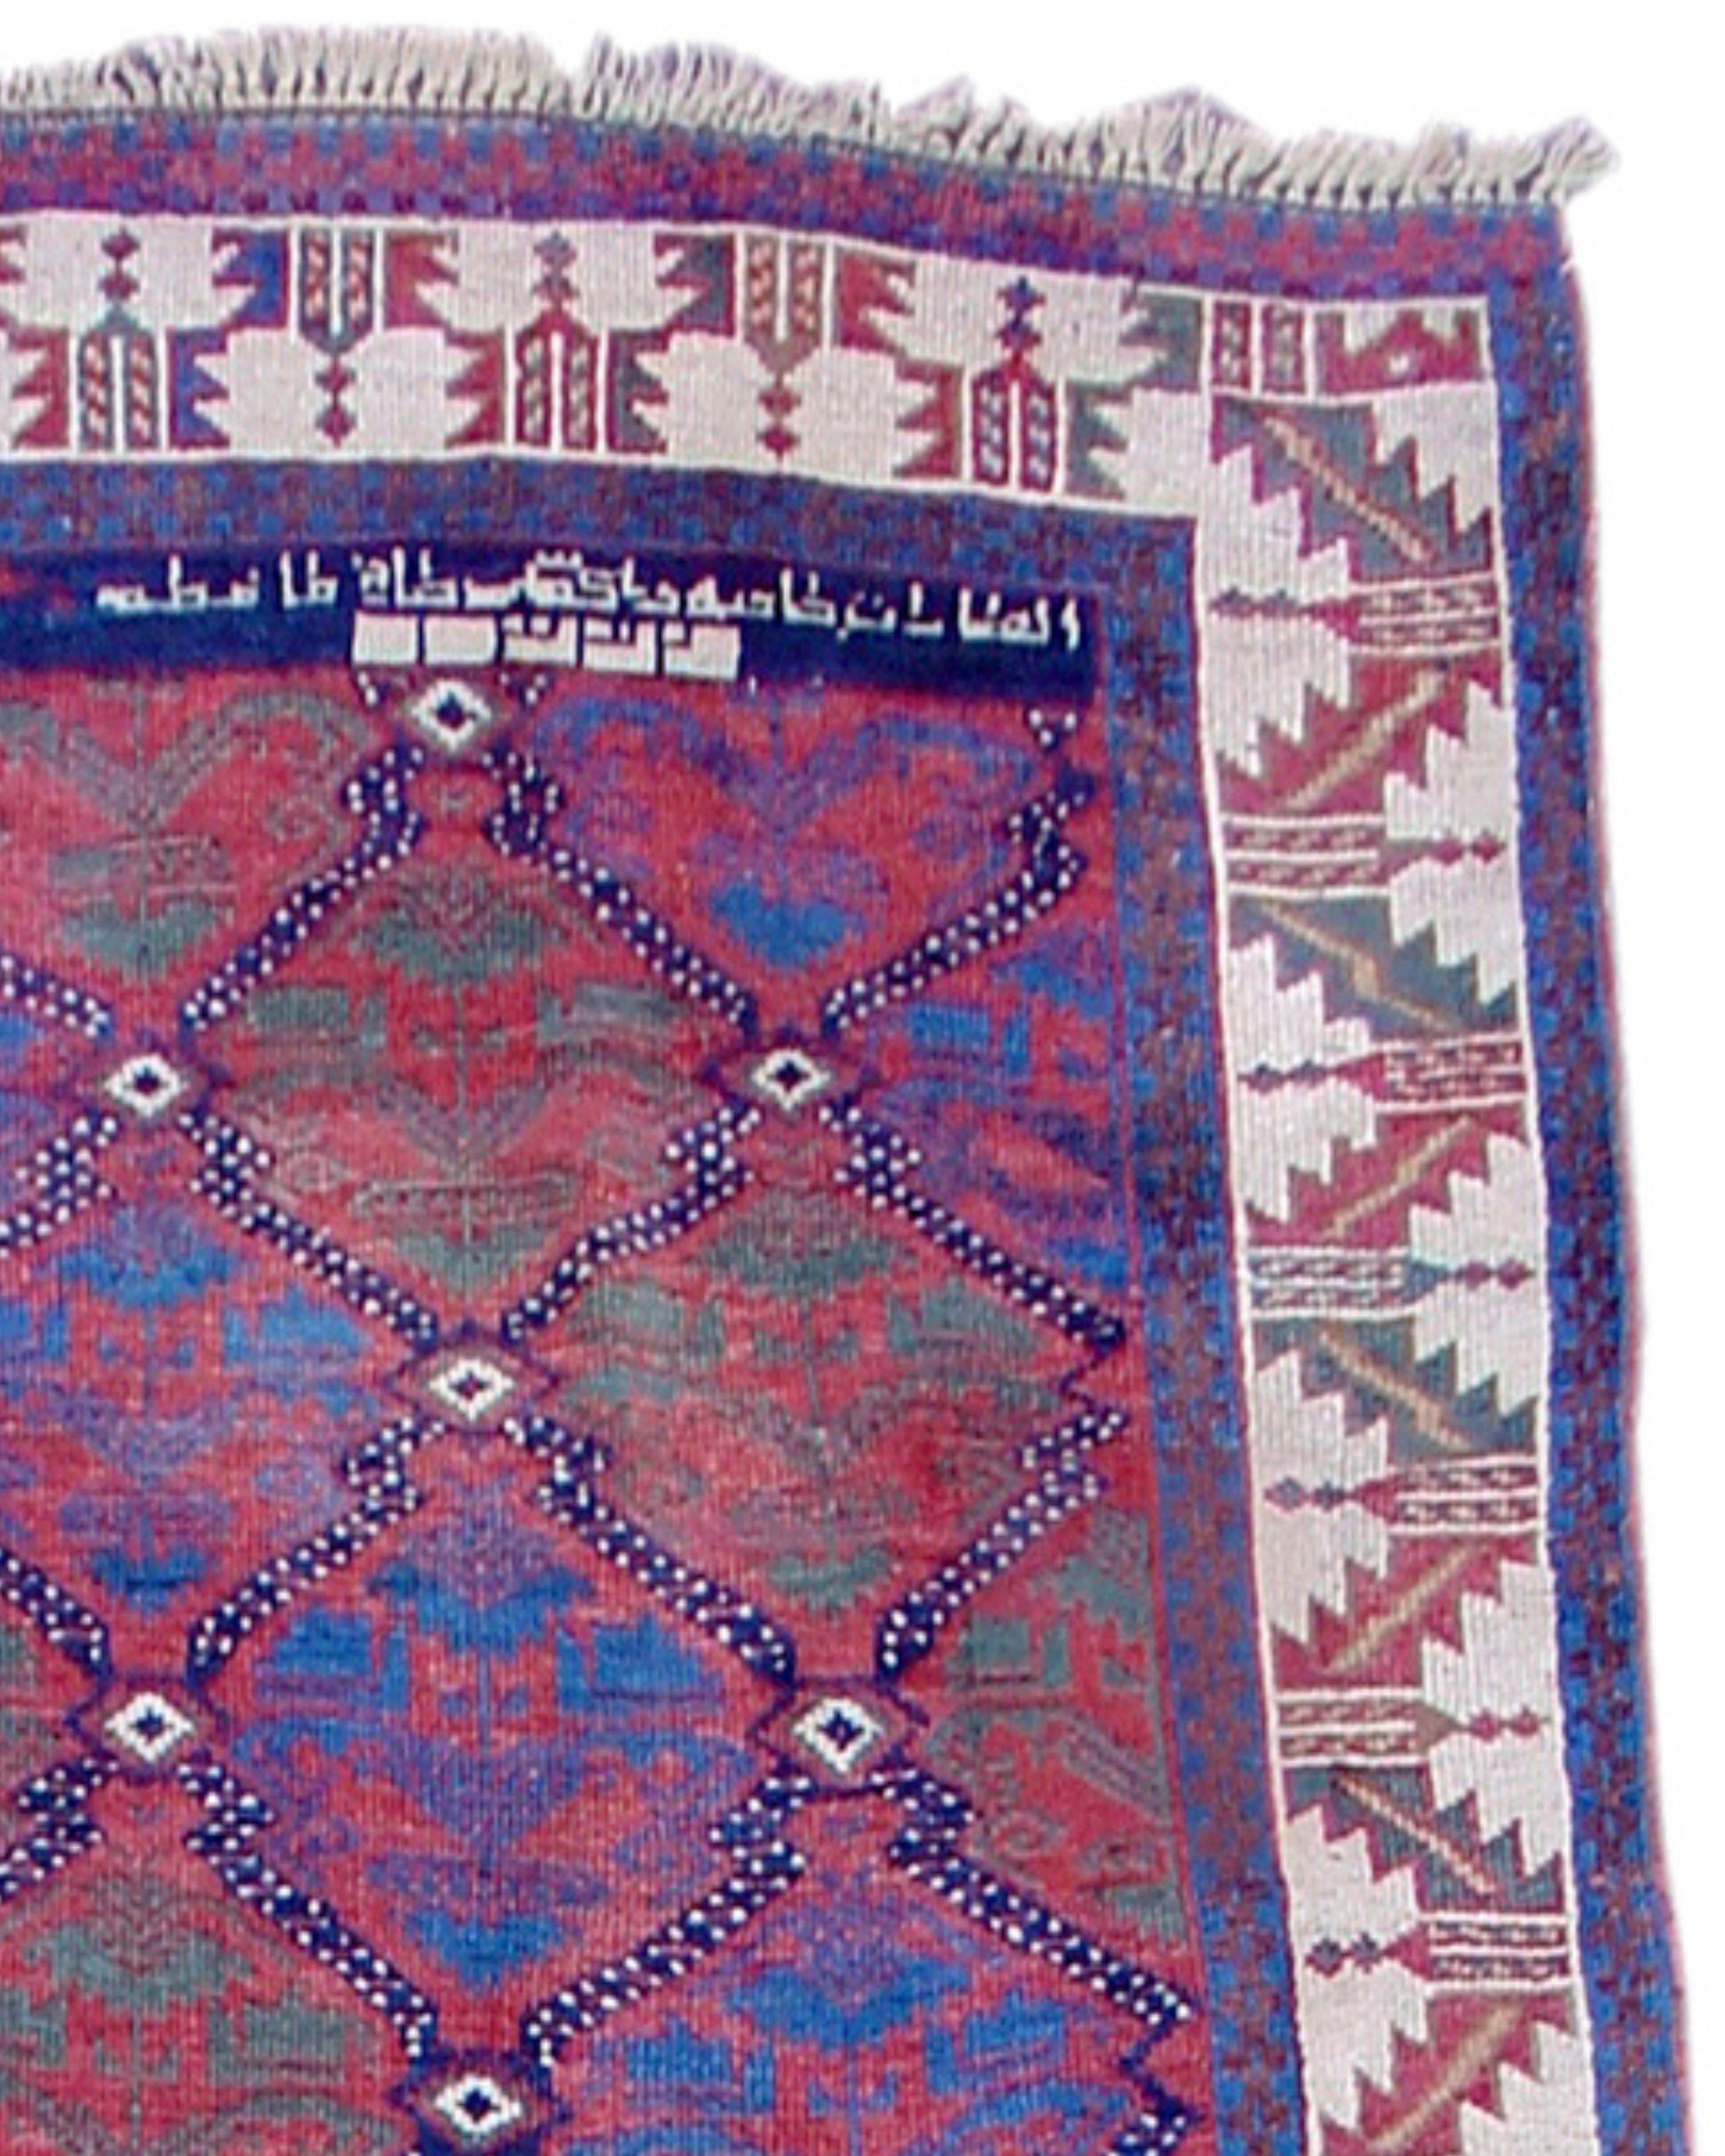 Antique Violet Blue Persian Kurdish Rug, Early 20th Century

Additional information:
Dimensions: 3'10